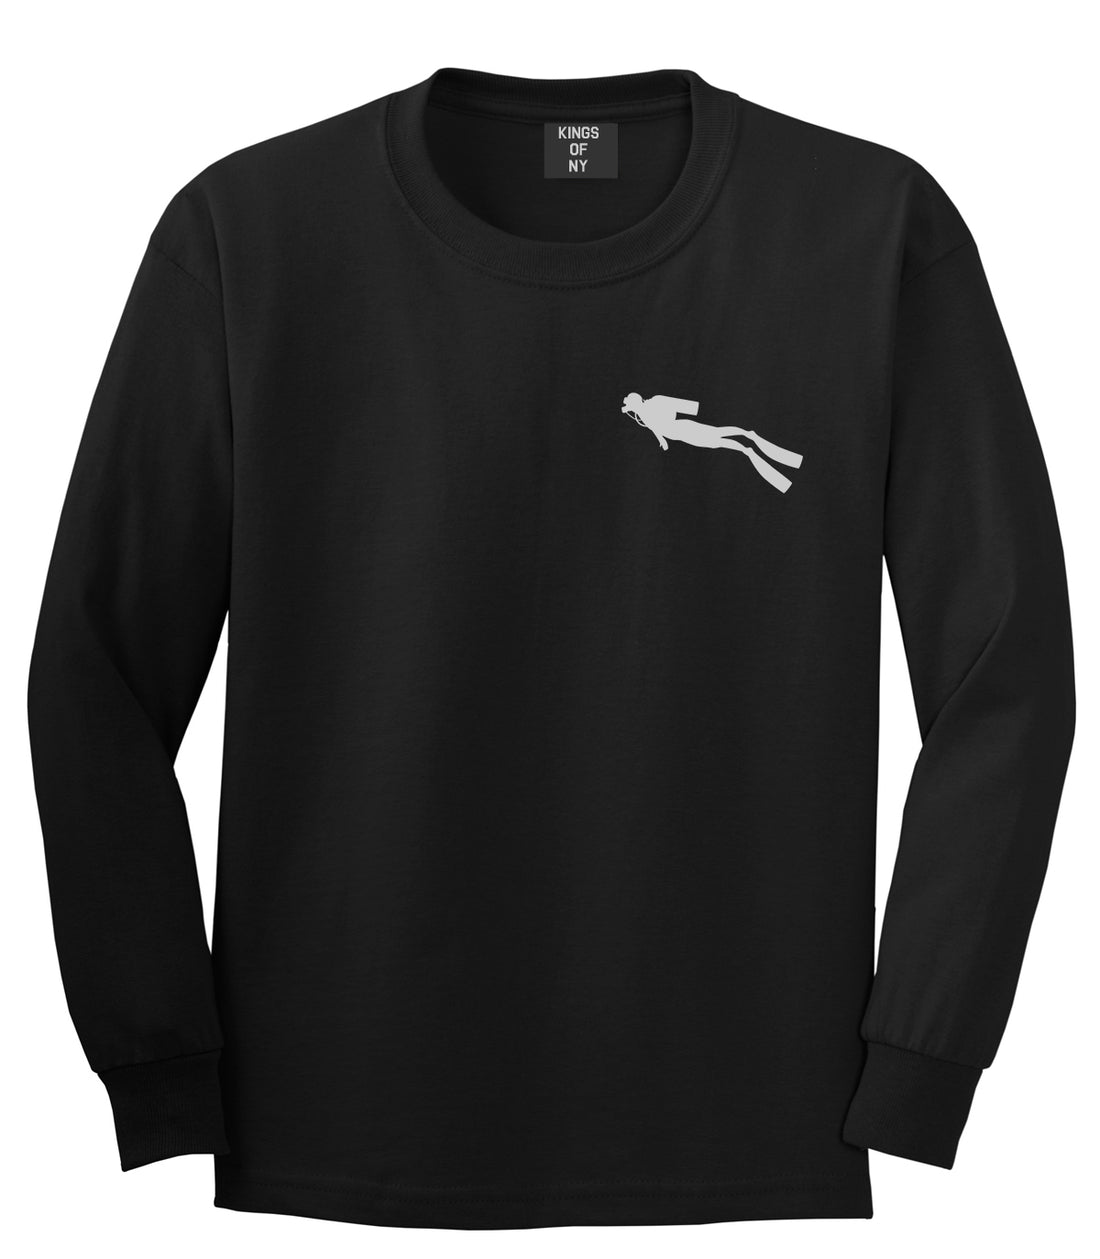 Scuba Diver Chest Mens Black Long Sleeve T-Shirt by Kings Of NY